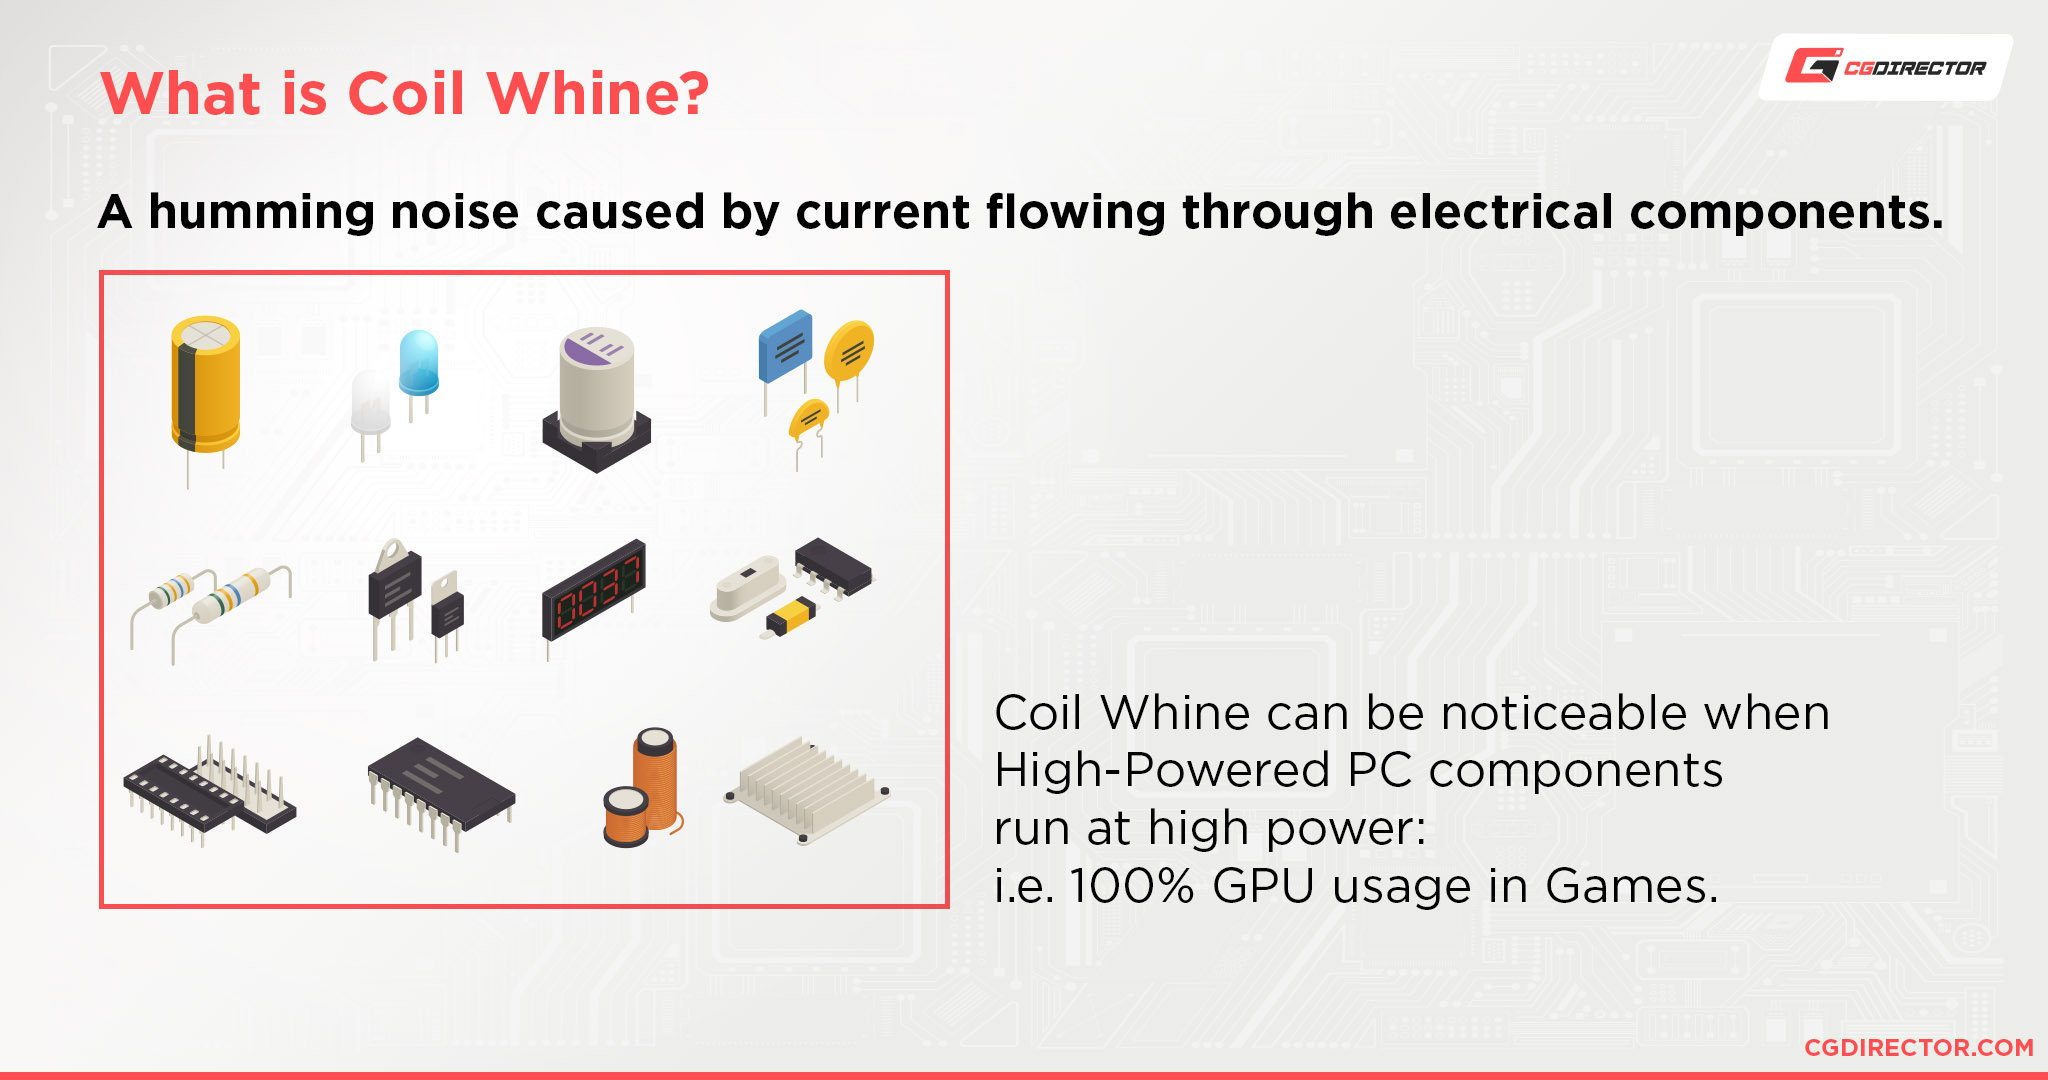 What is Coil Whine